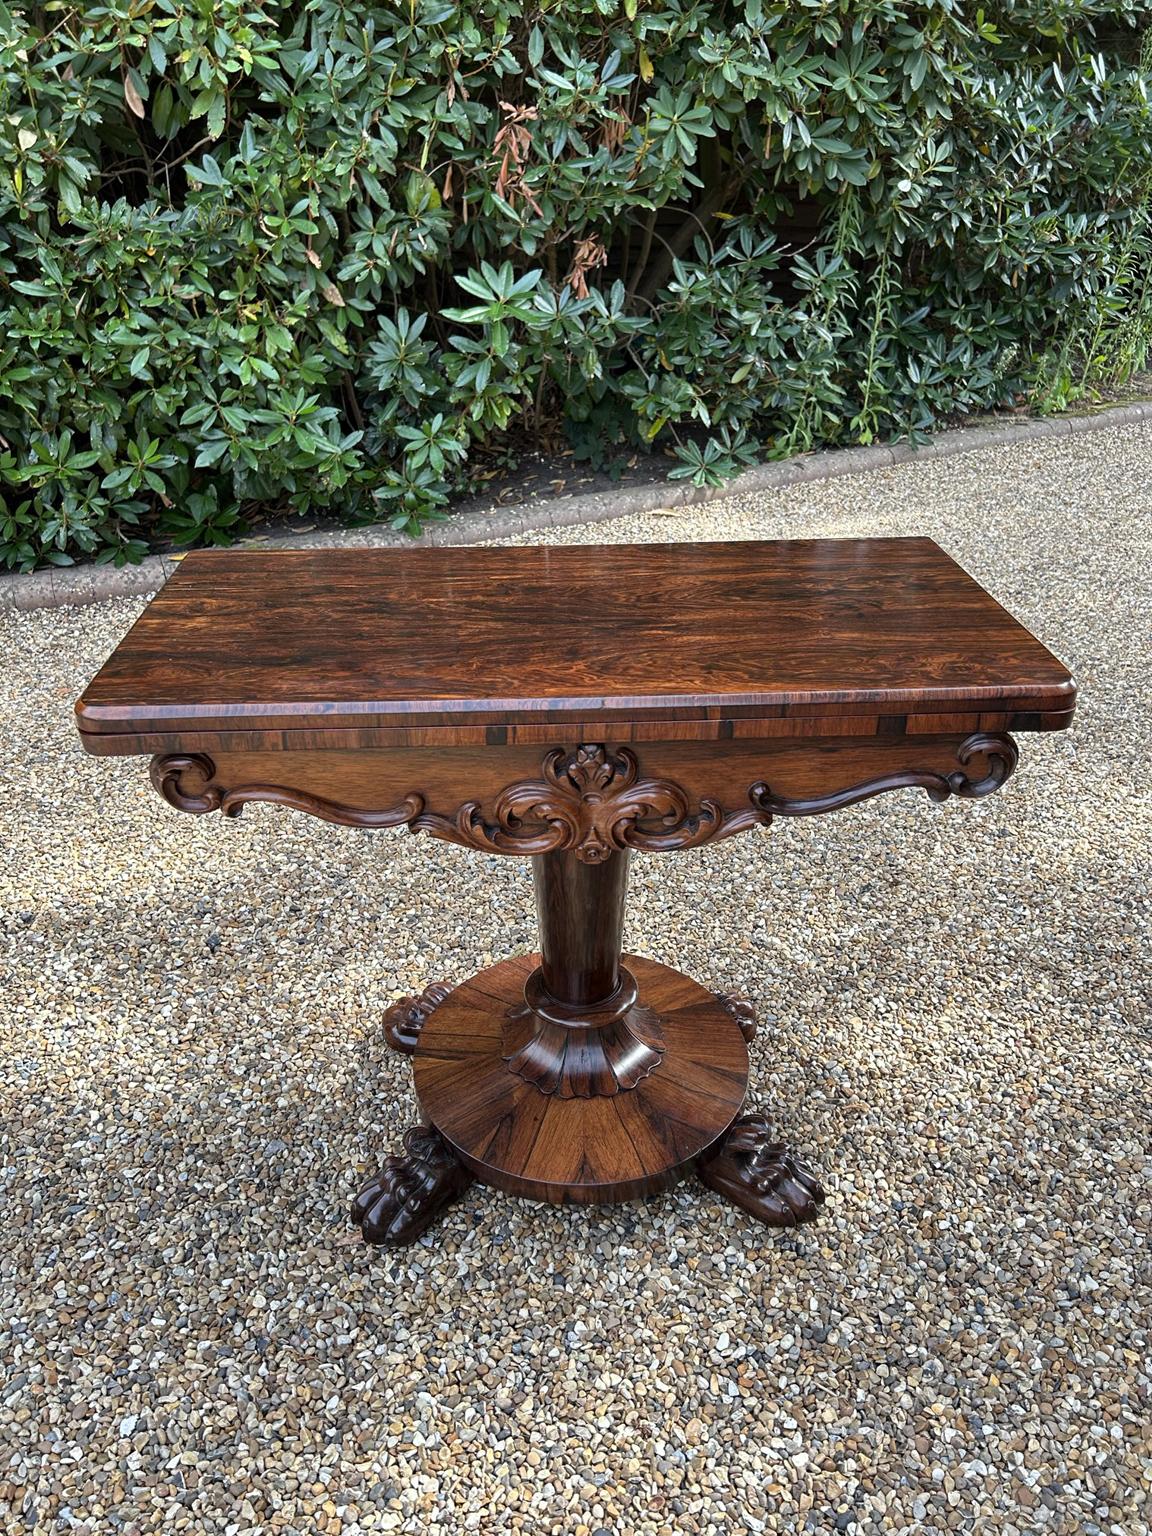 A very high quality 19th Century William IV – D Shaped Rosewood Card Table with beautifully figured rosewood throughout. The cylindrical turned rosewood column supported by circular base on carved rosewood lion claw feet on castors. The top rotates